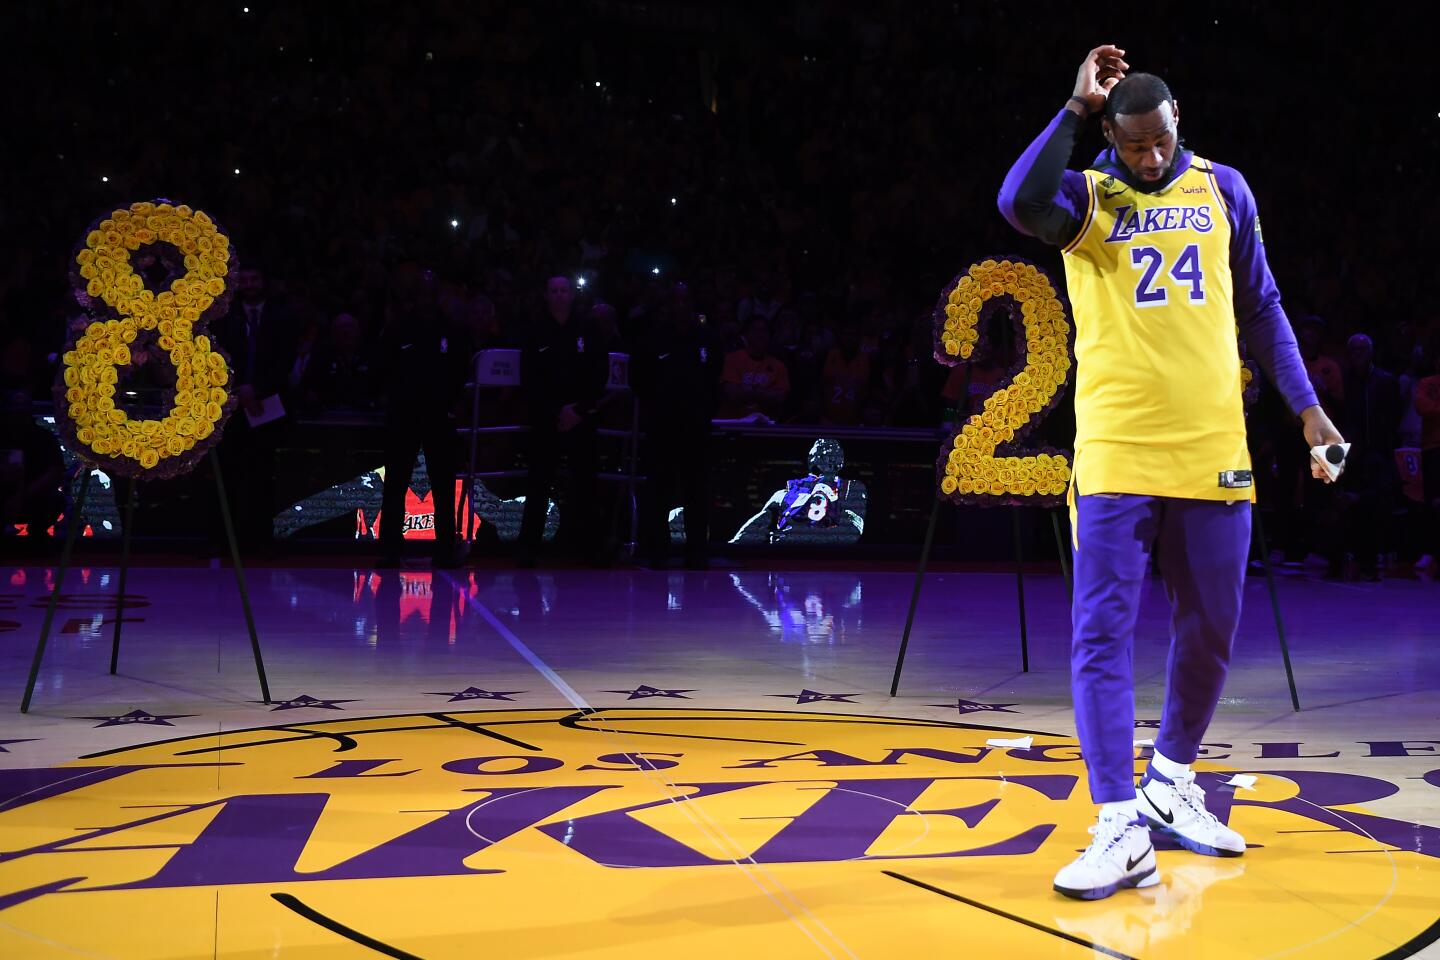 LeBron James speaks to the crowd at Staples Center during a ceremony honoring the life of Kobe Bryant at Staples Center on Jan. 31, 2020.